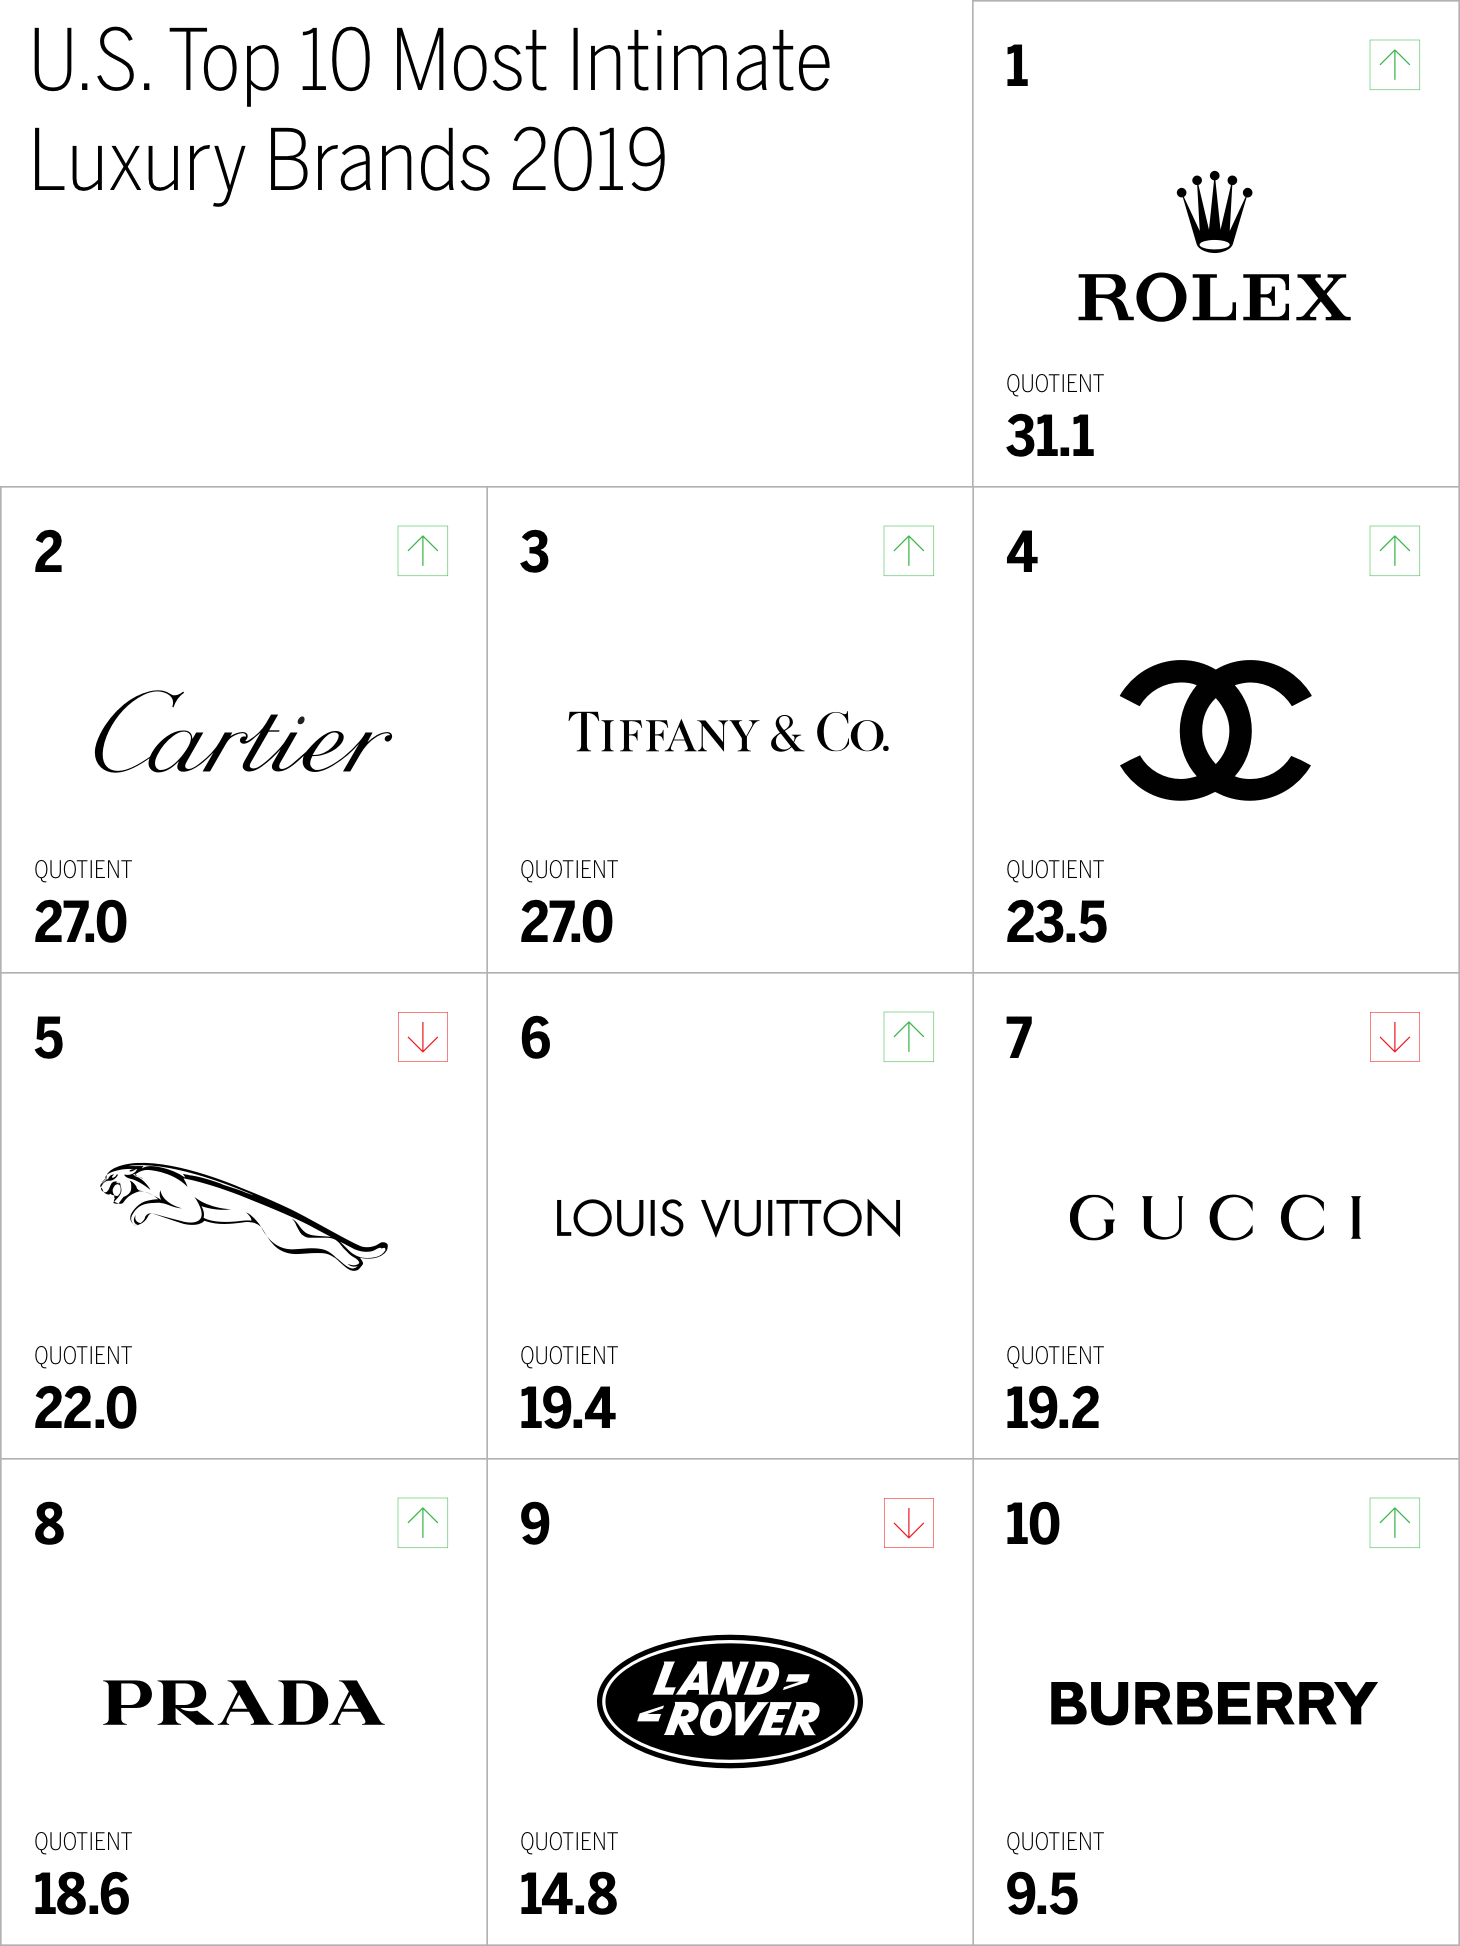 Luxury Brands: High costs, Low connections - MBLM